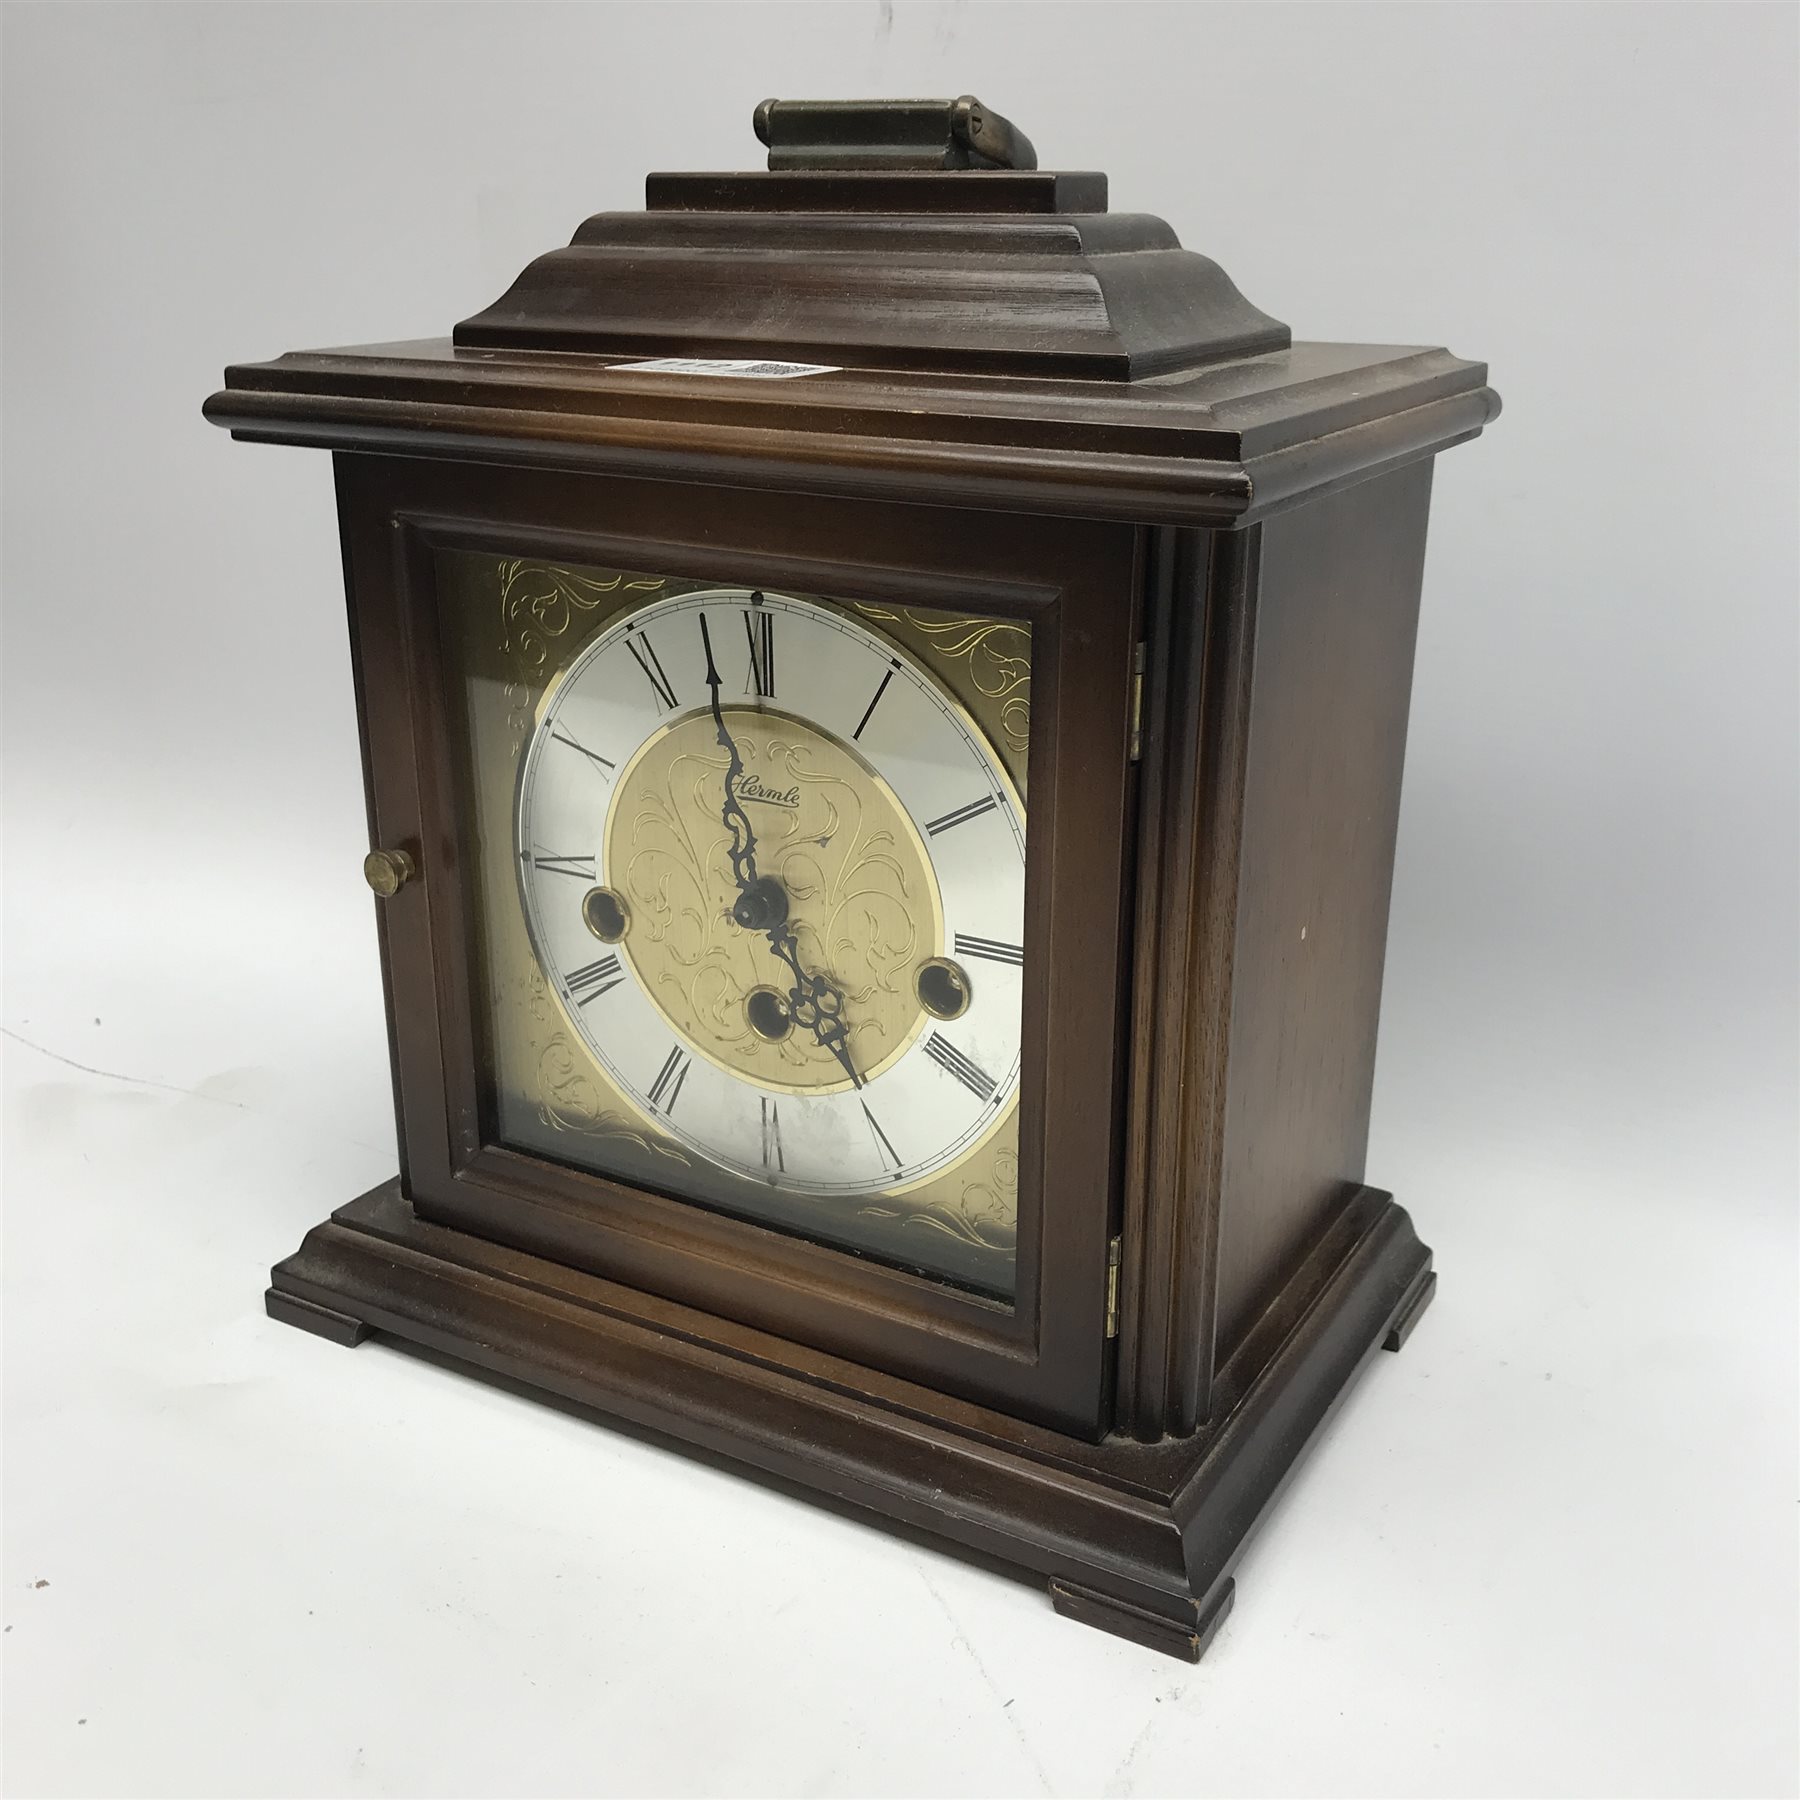 Hermle bracket clock, stained beech case, engraved dial with Roman chapter ring, triple train driven - Image 3 of 4